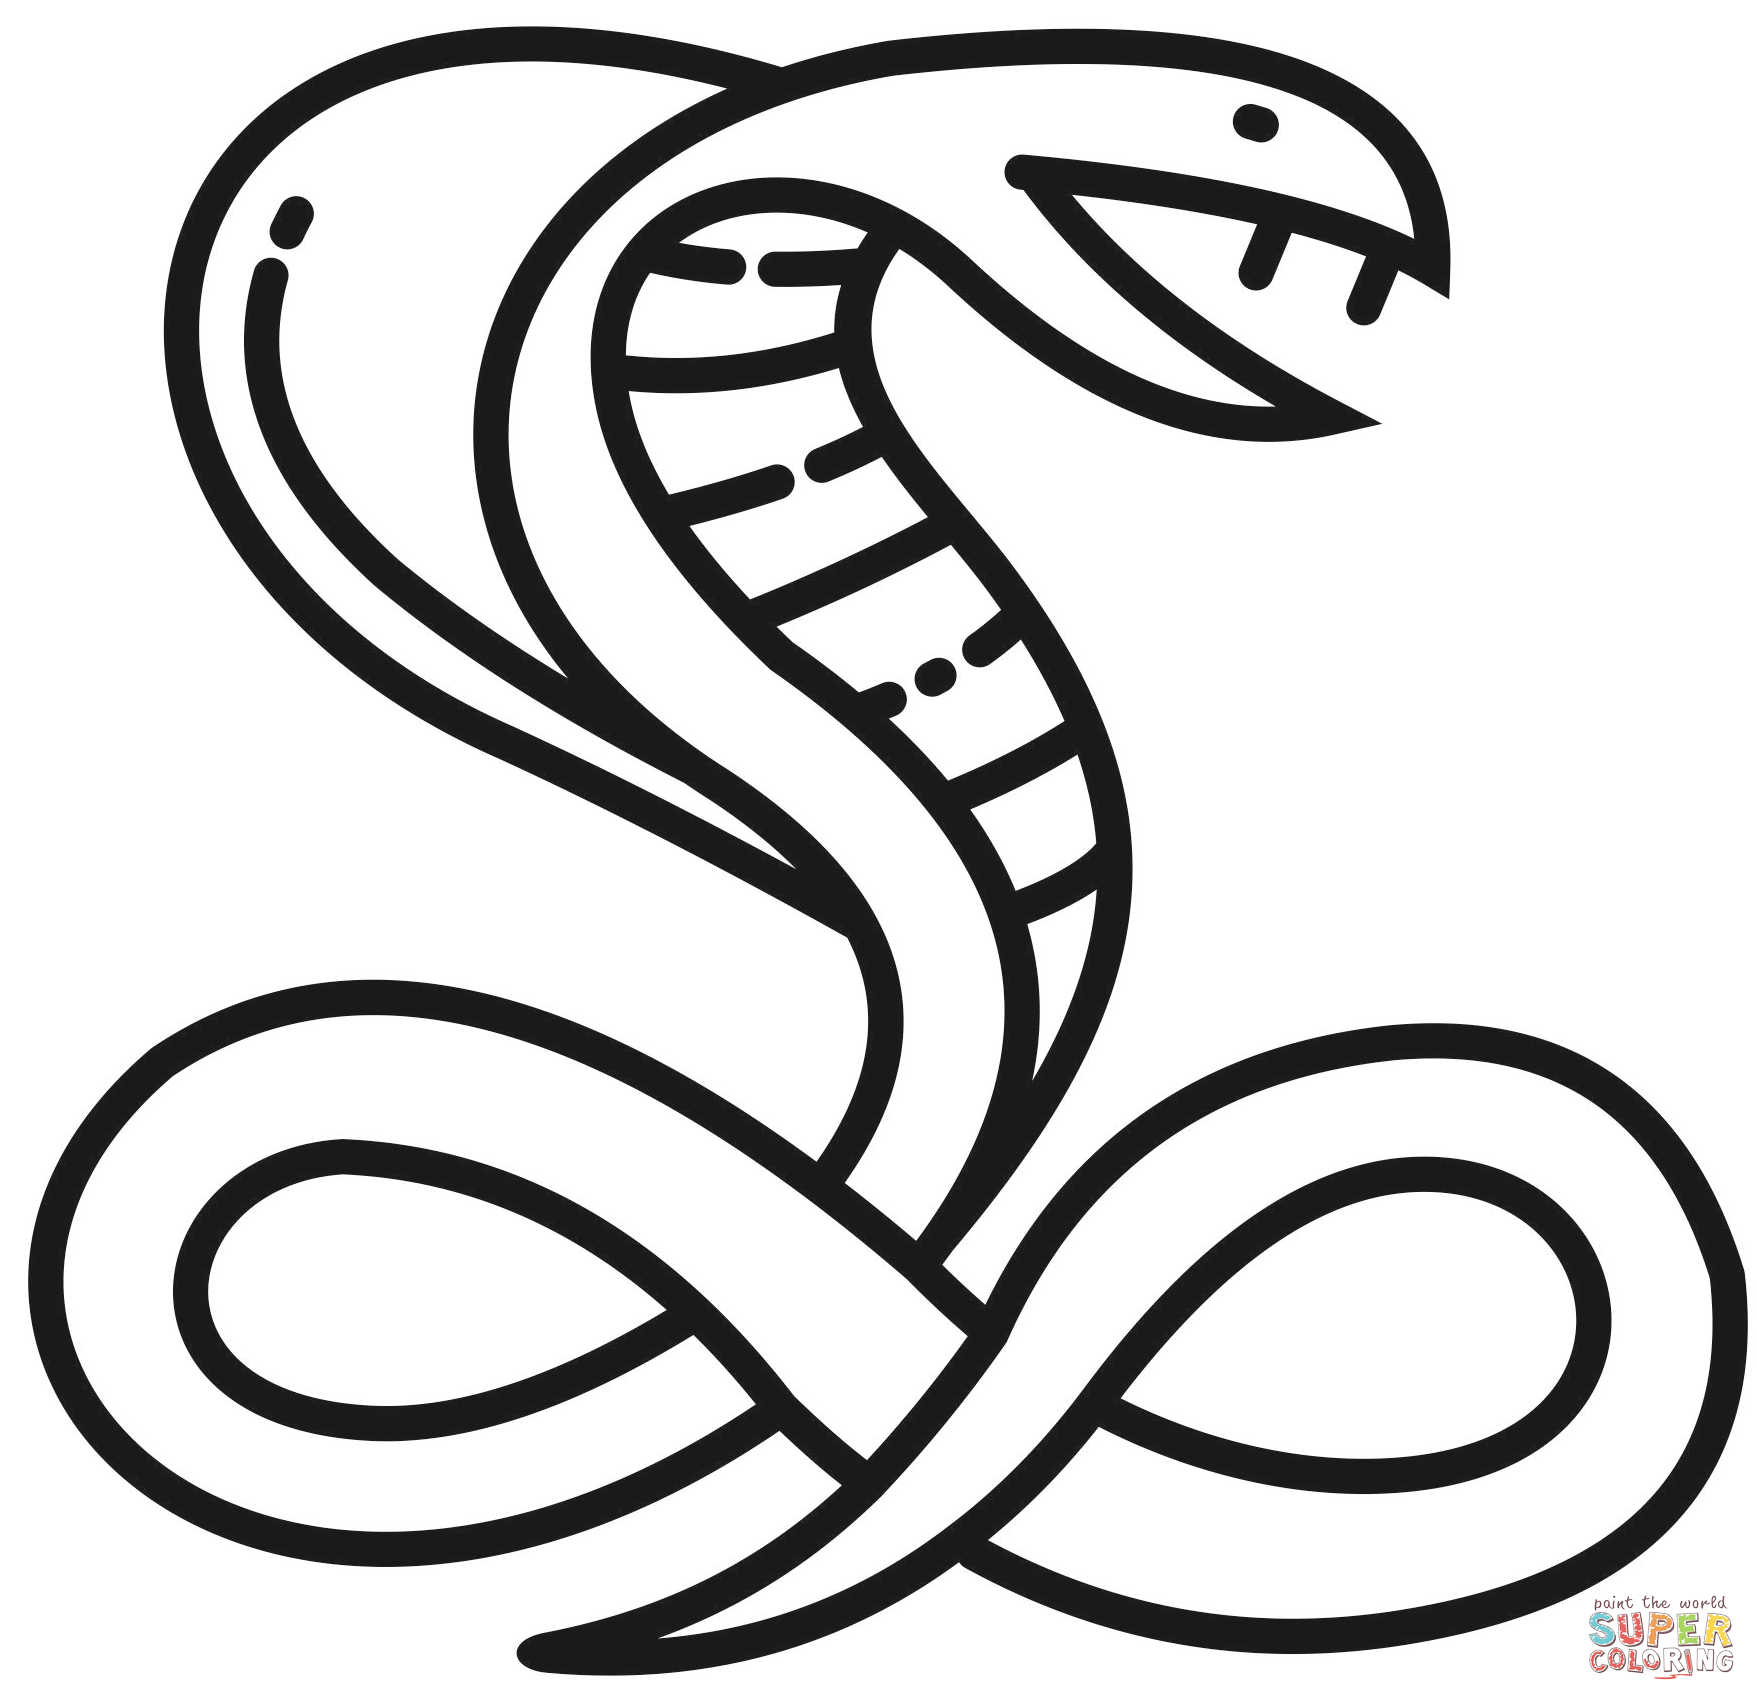 Cobra coloring page free printable coloring pages